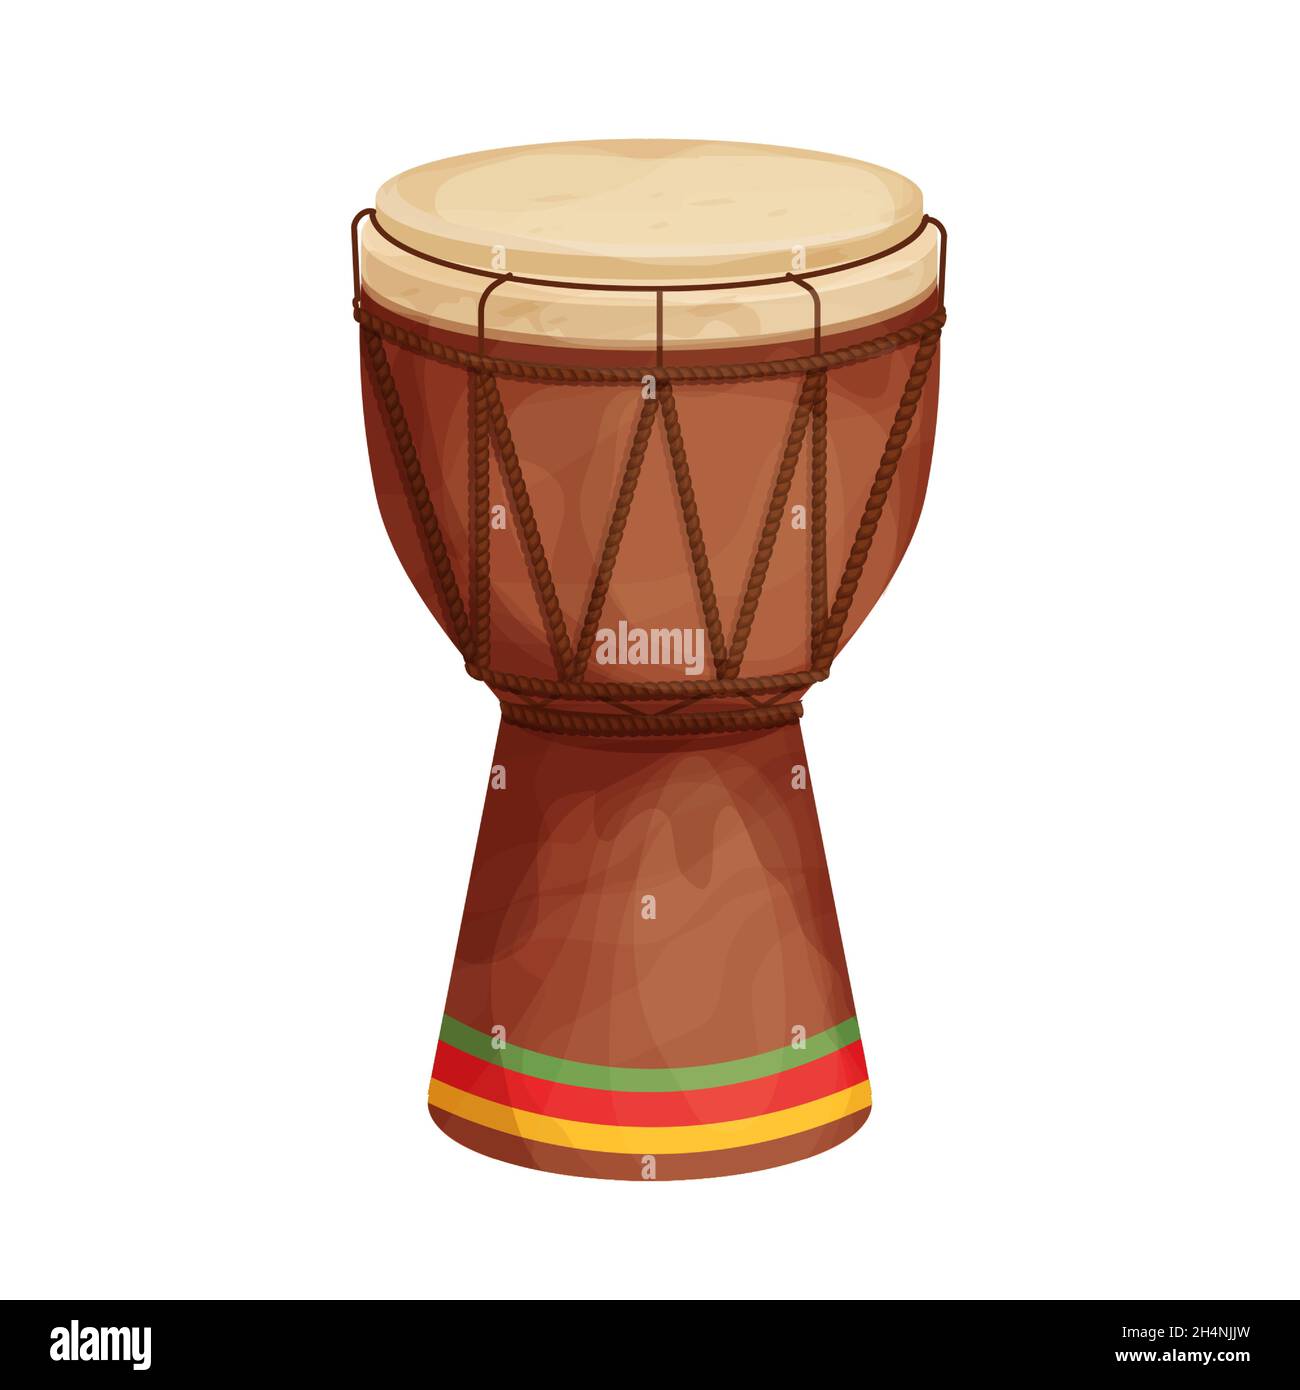 Djembe africa Banque d'images vectorielles - Alamy